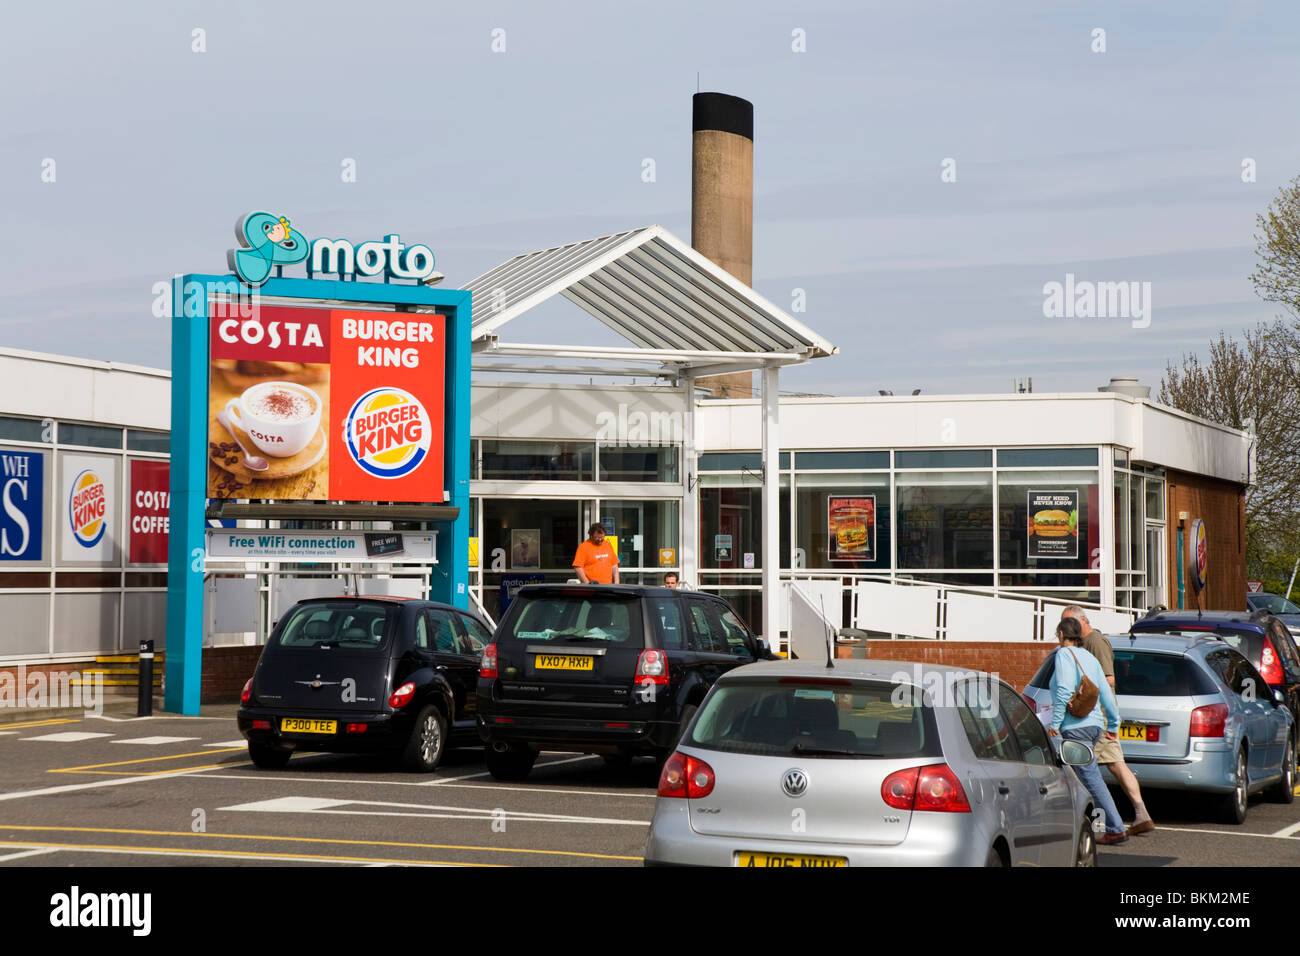 Frankley motorway Services, operated by MOTO, on the M5 motorway (near junction 3), North bound. UK. Stock Photo